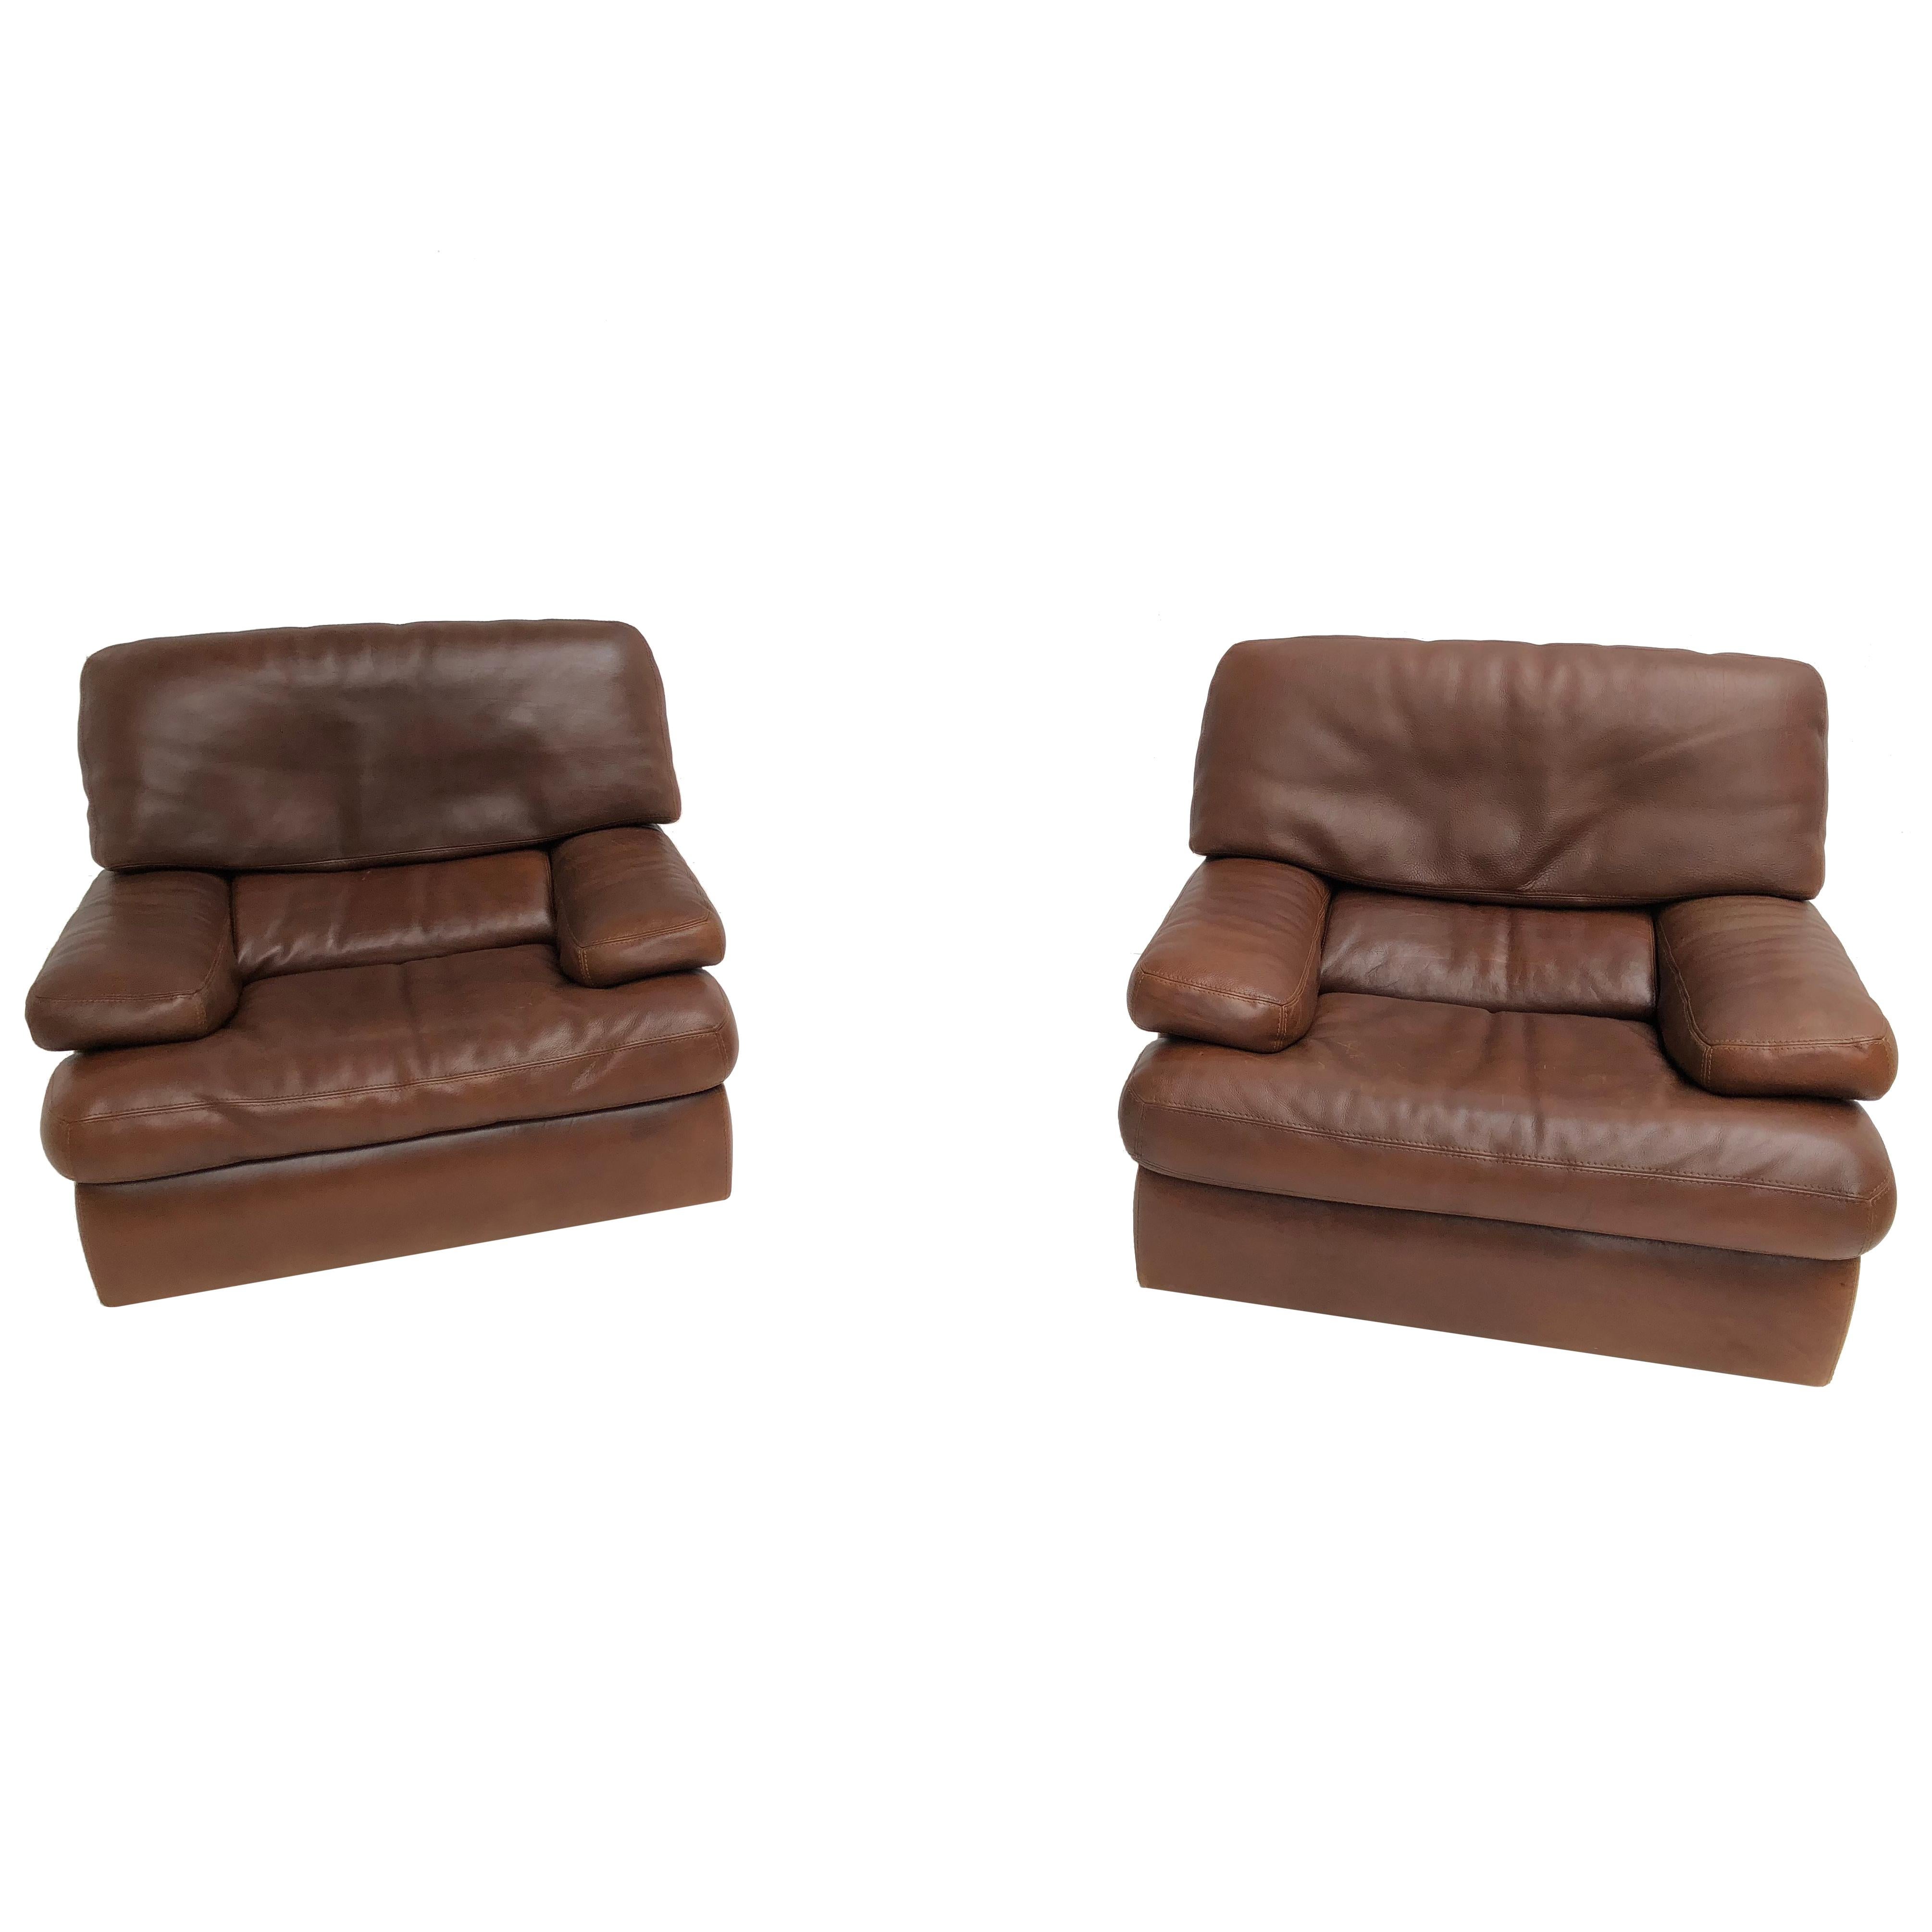 Pair of Chocolate Brown Vintage Leather Roche Bobois Lounge Chairs, 1970s